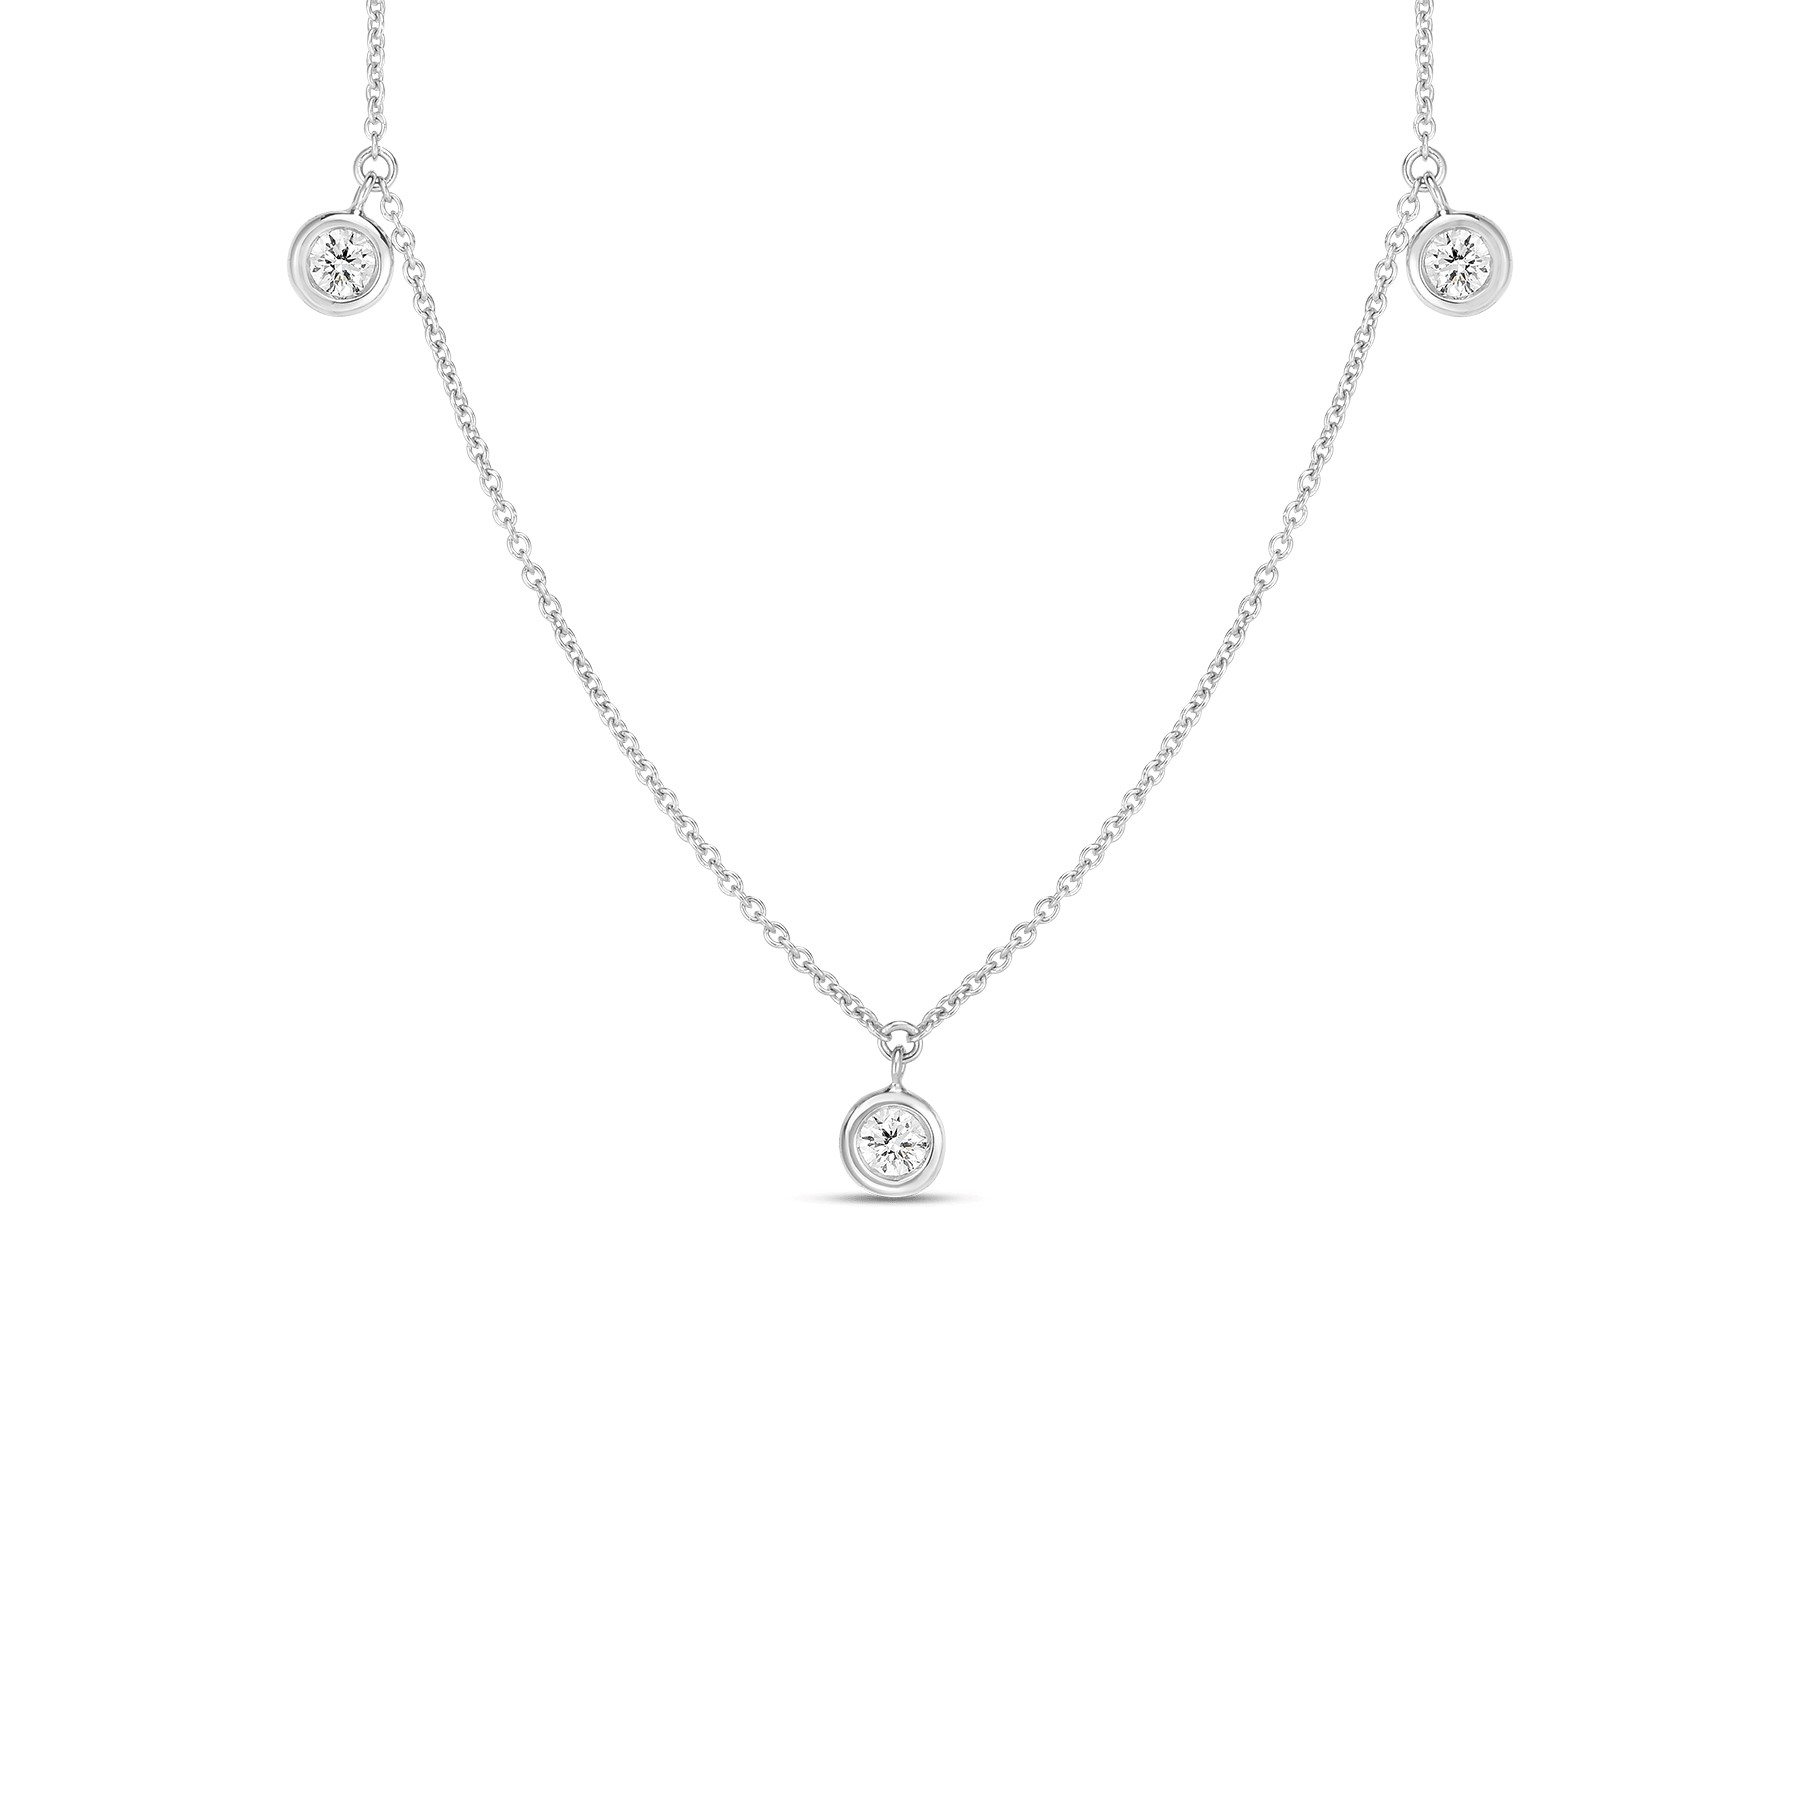 Roberto Coin 18K White Gold 3 Stations Dangling Necklace